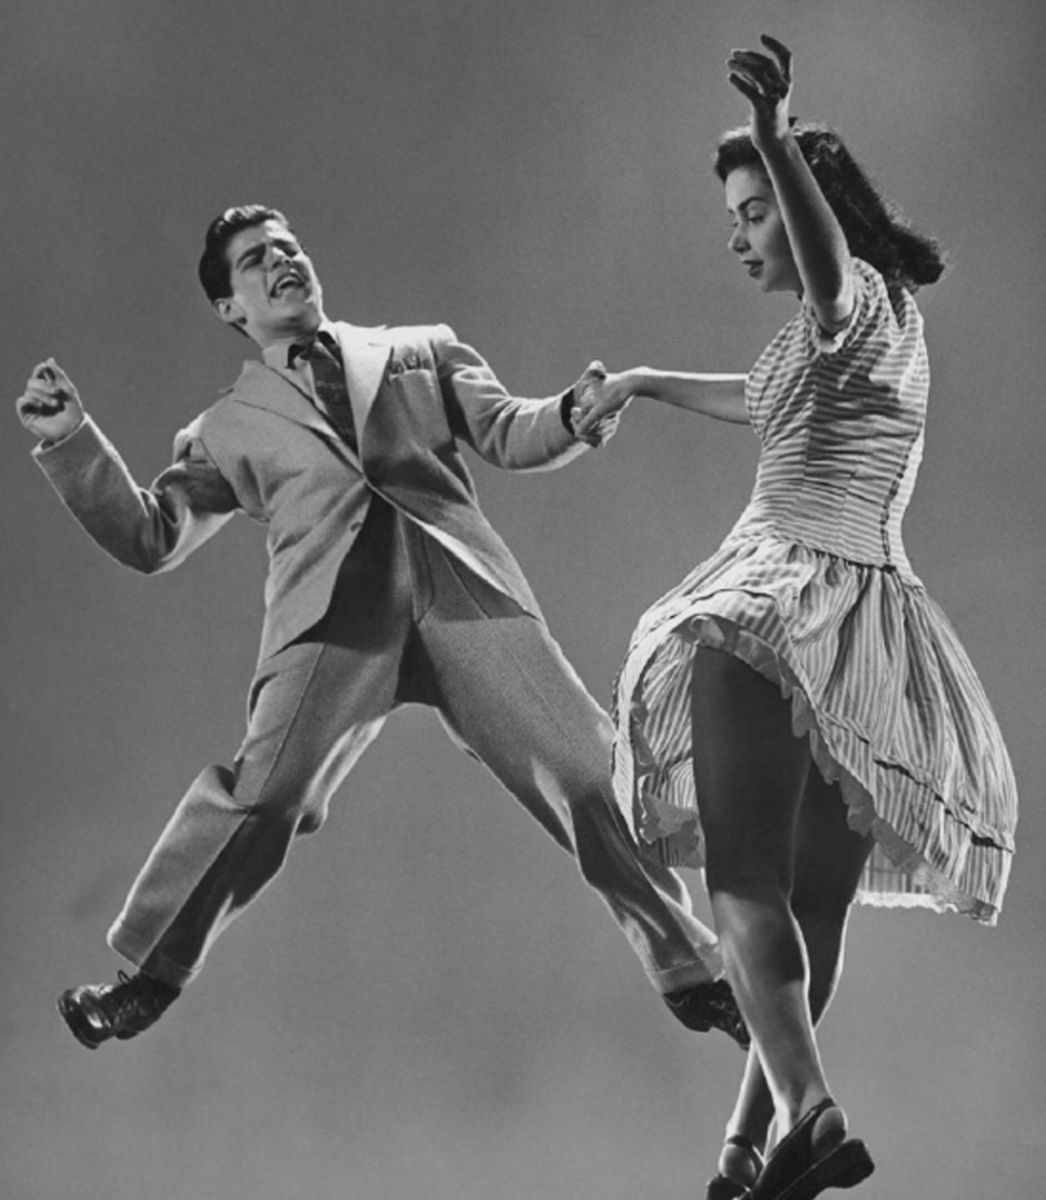 Boogie Form Of Swing Dance Related To The Blues